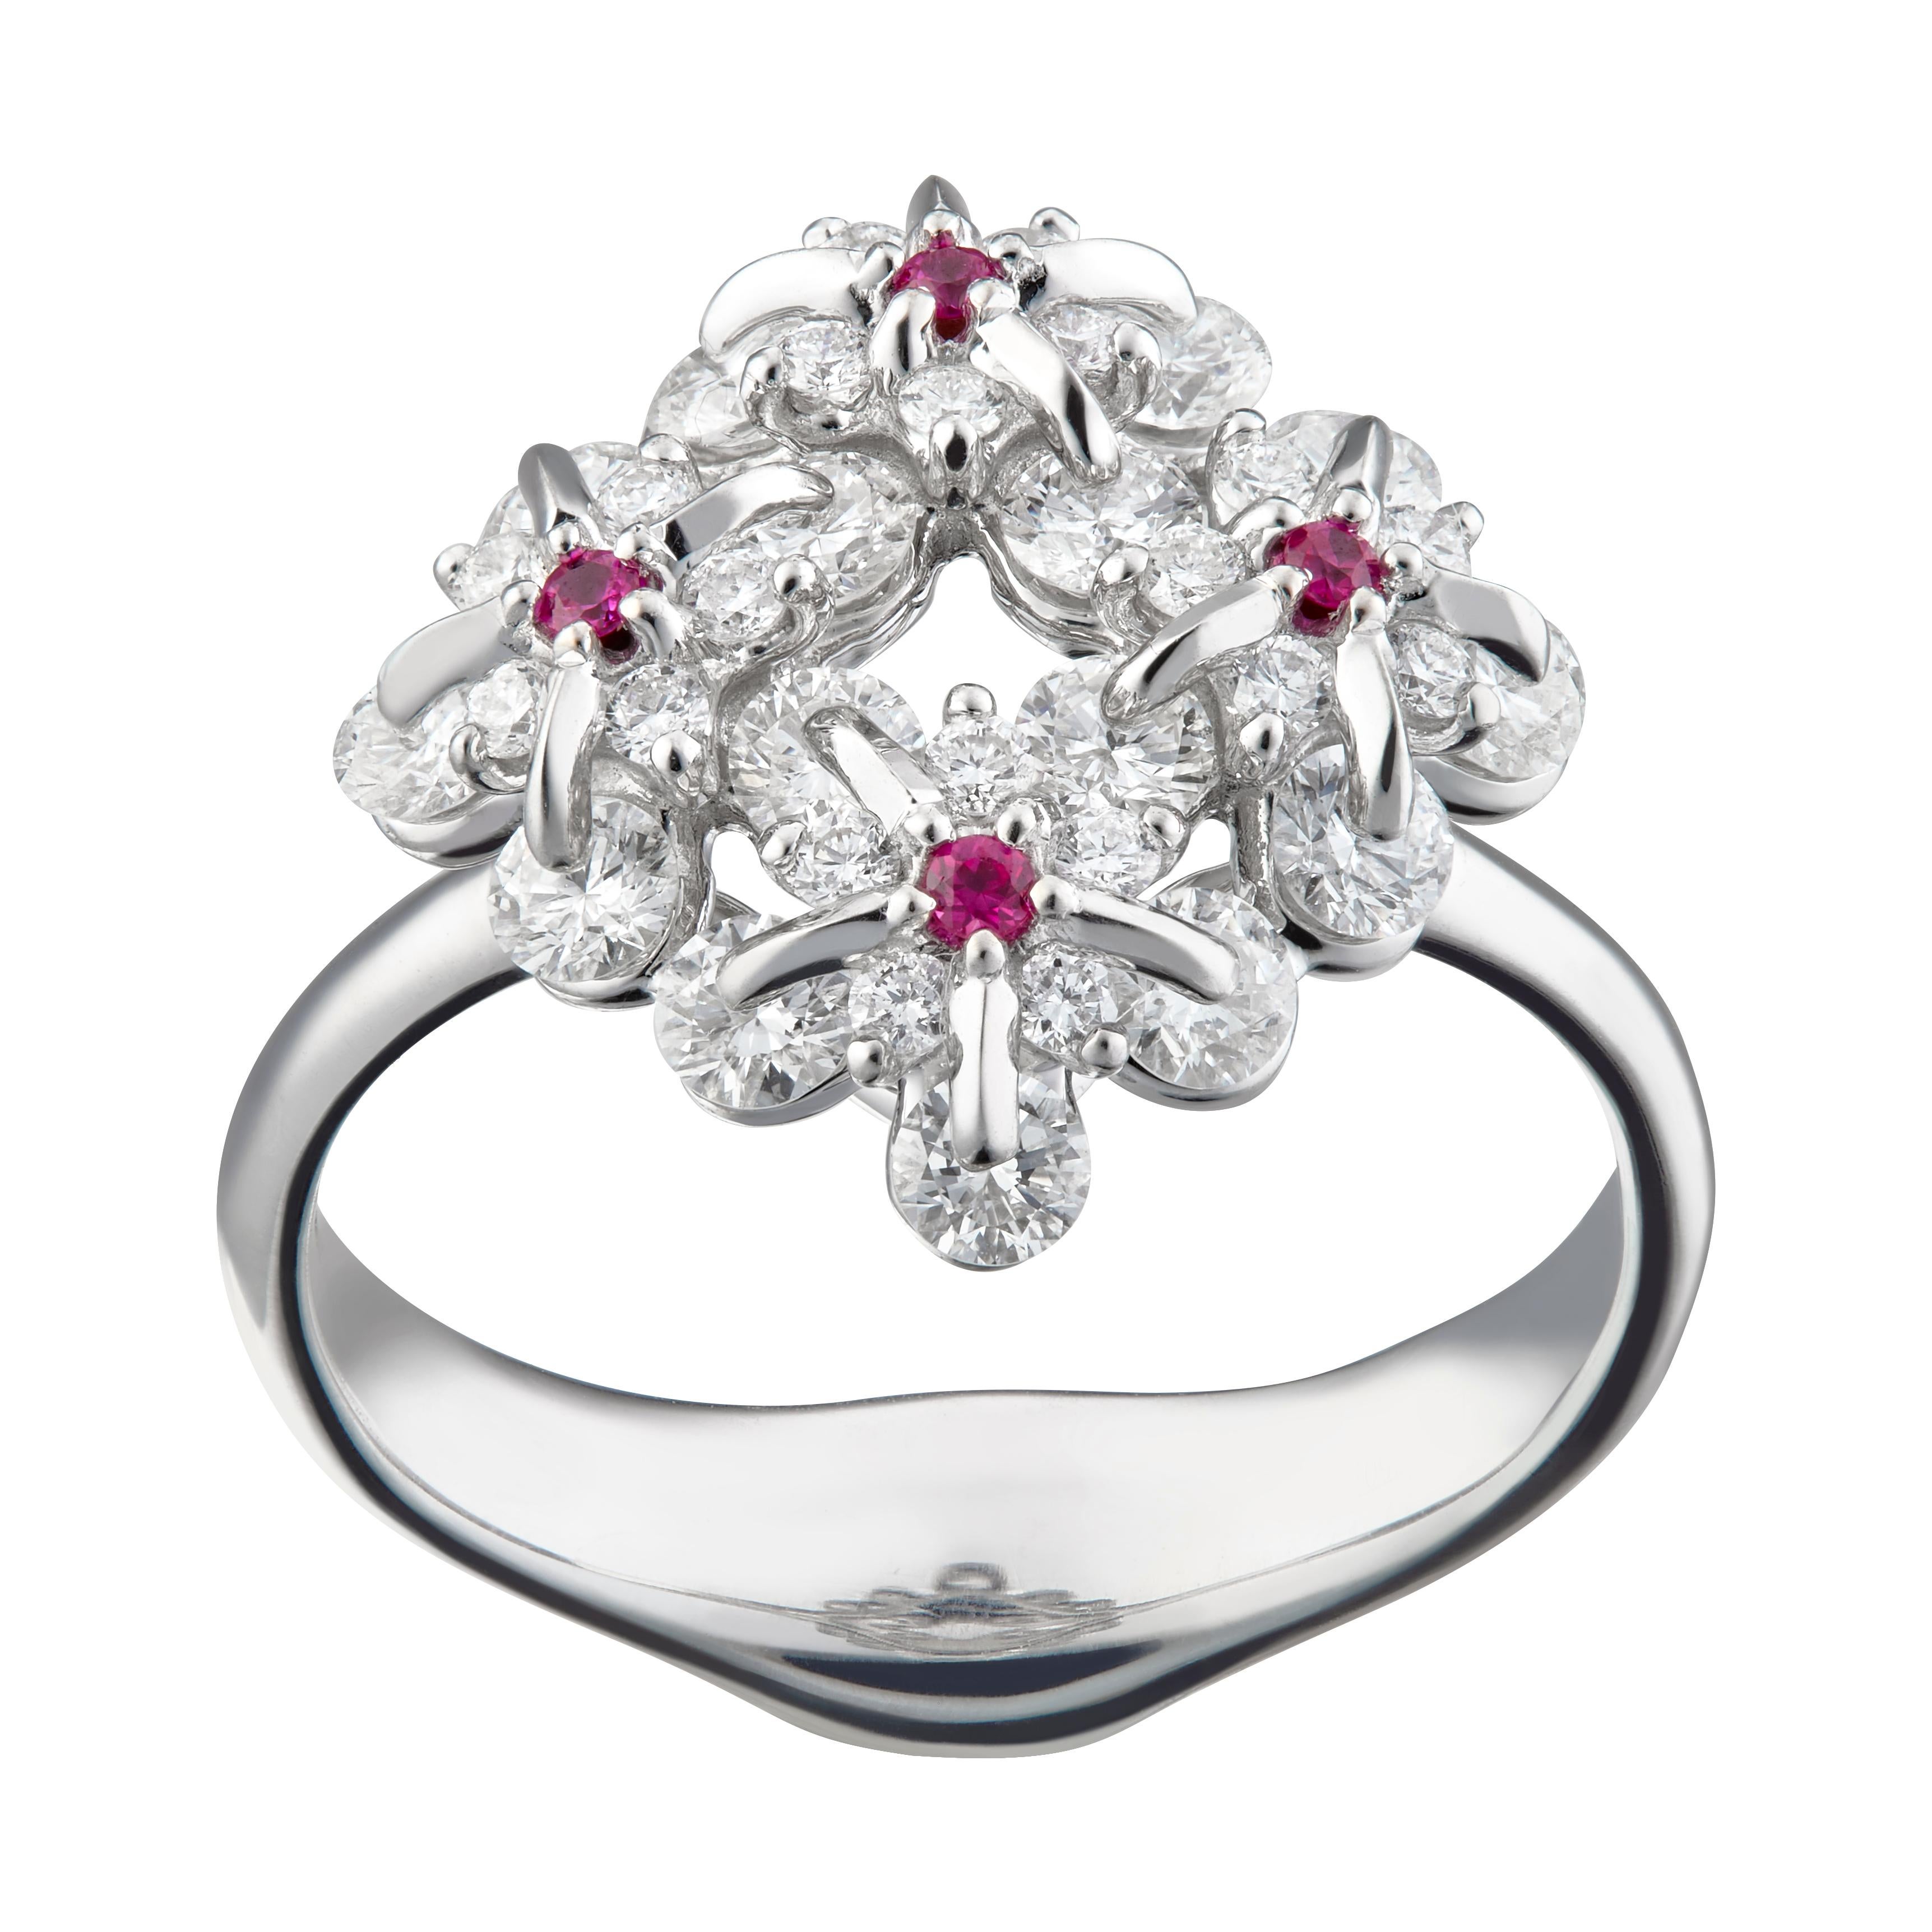 Symbol of remembrance and eternal love, Forget Me Not flower has become an everlasting flower made in 18karat white gold, 1.102ct diamonds and rubies. Mounted in Waltzing Brilliance technology, this lively ring will be a precious memory  of 